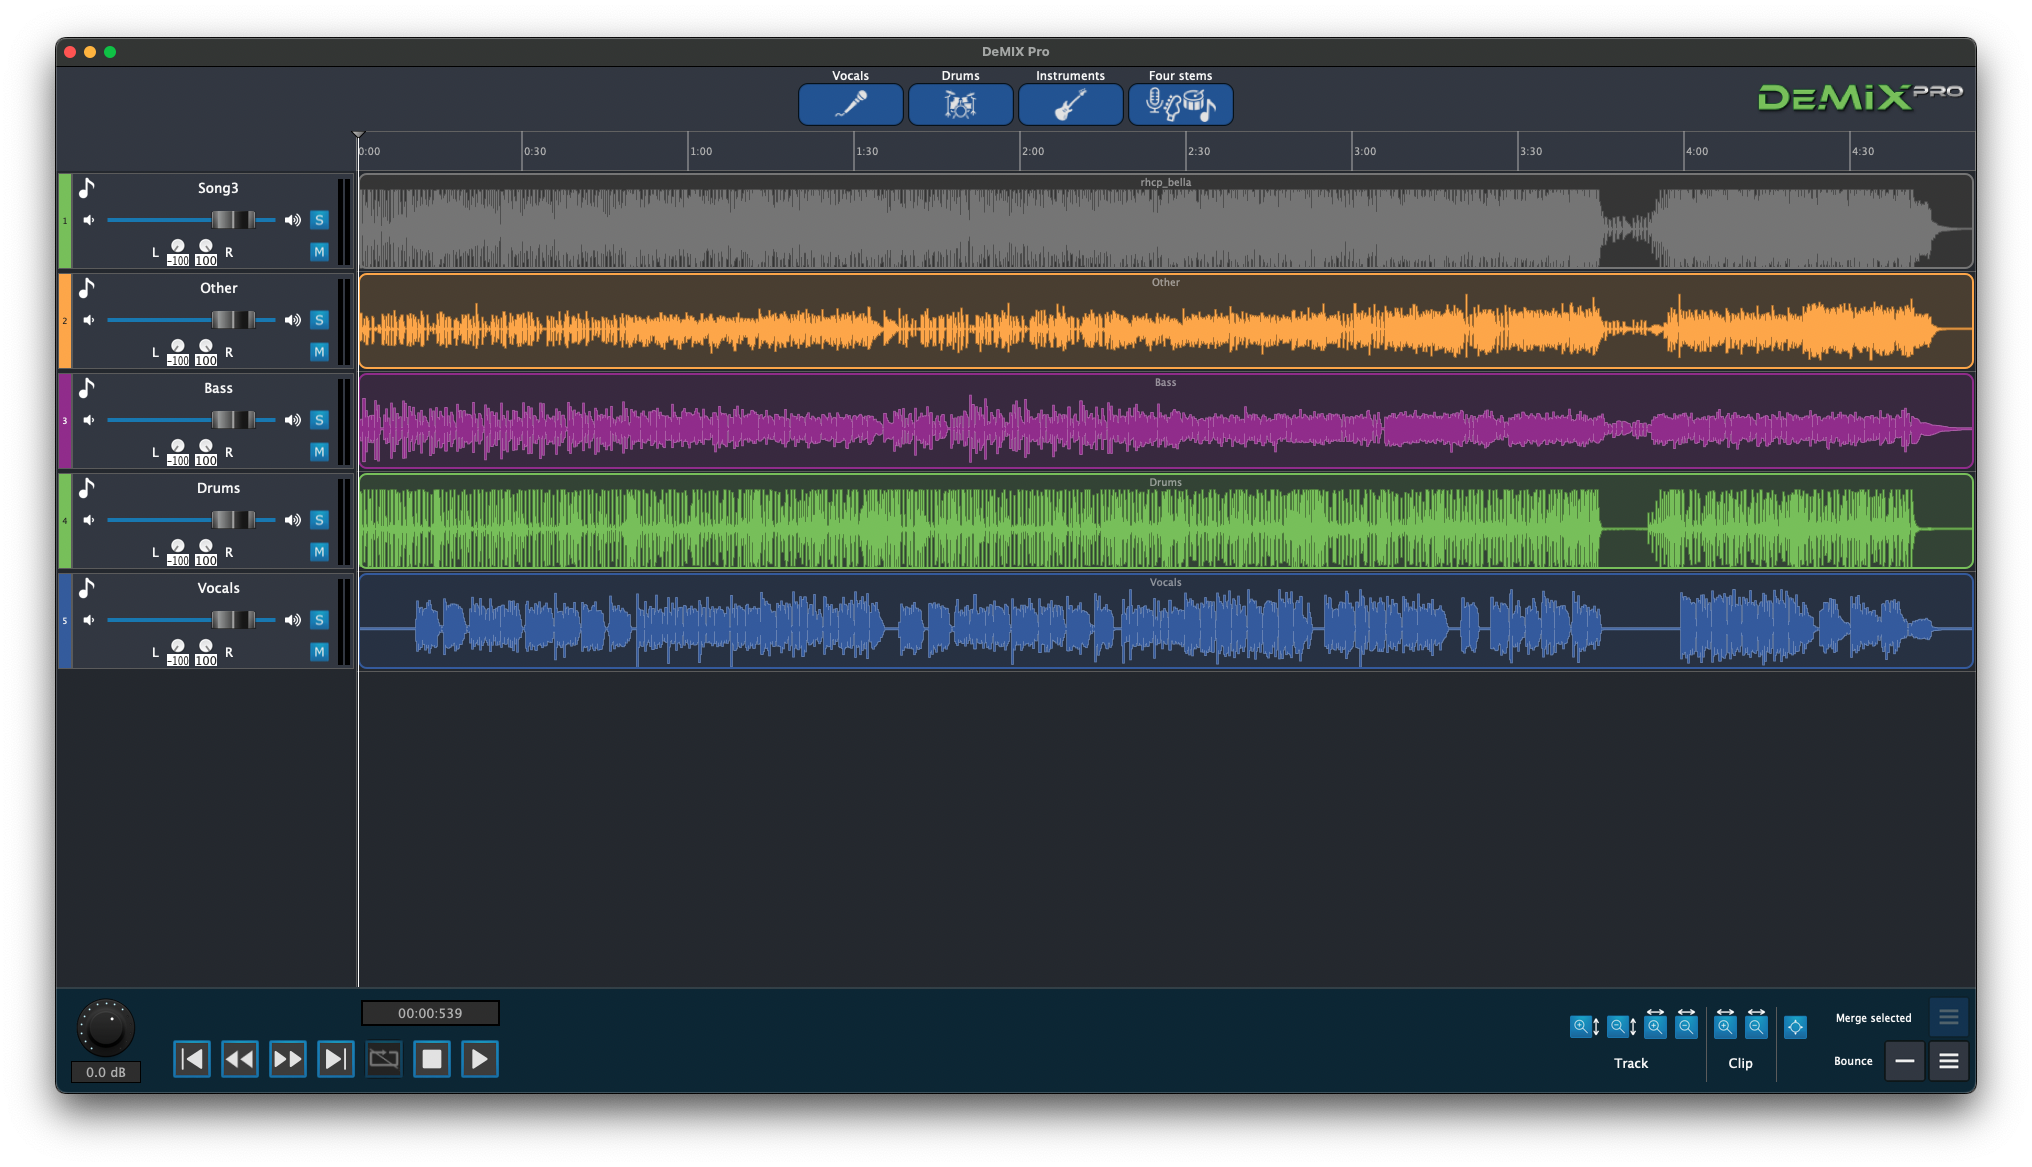 A screenshot of DeMixPro, showing a song broken down into its components: vocals, drums, bass and other instruments